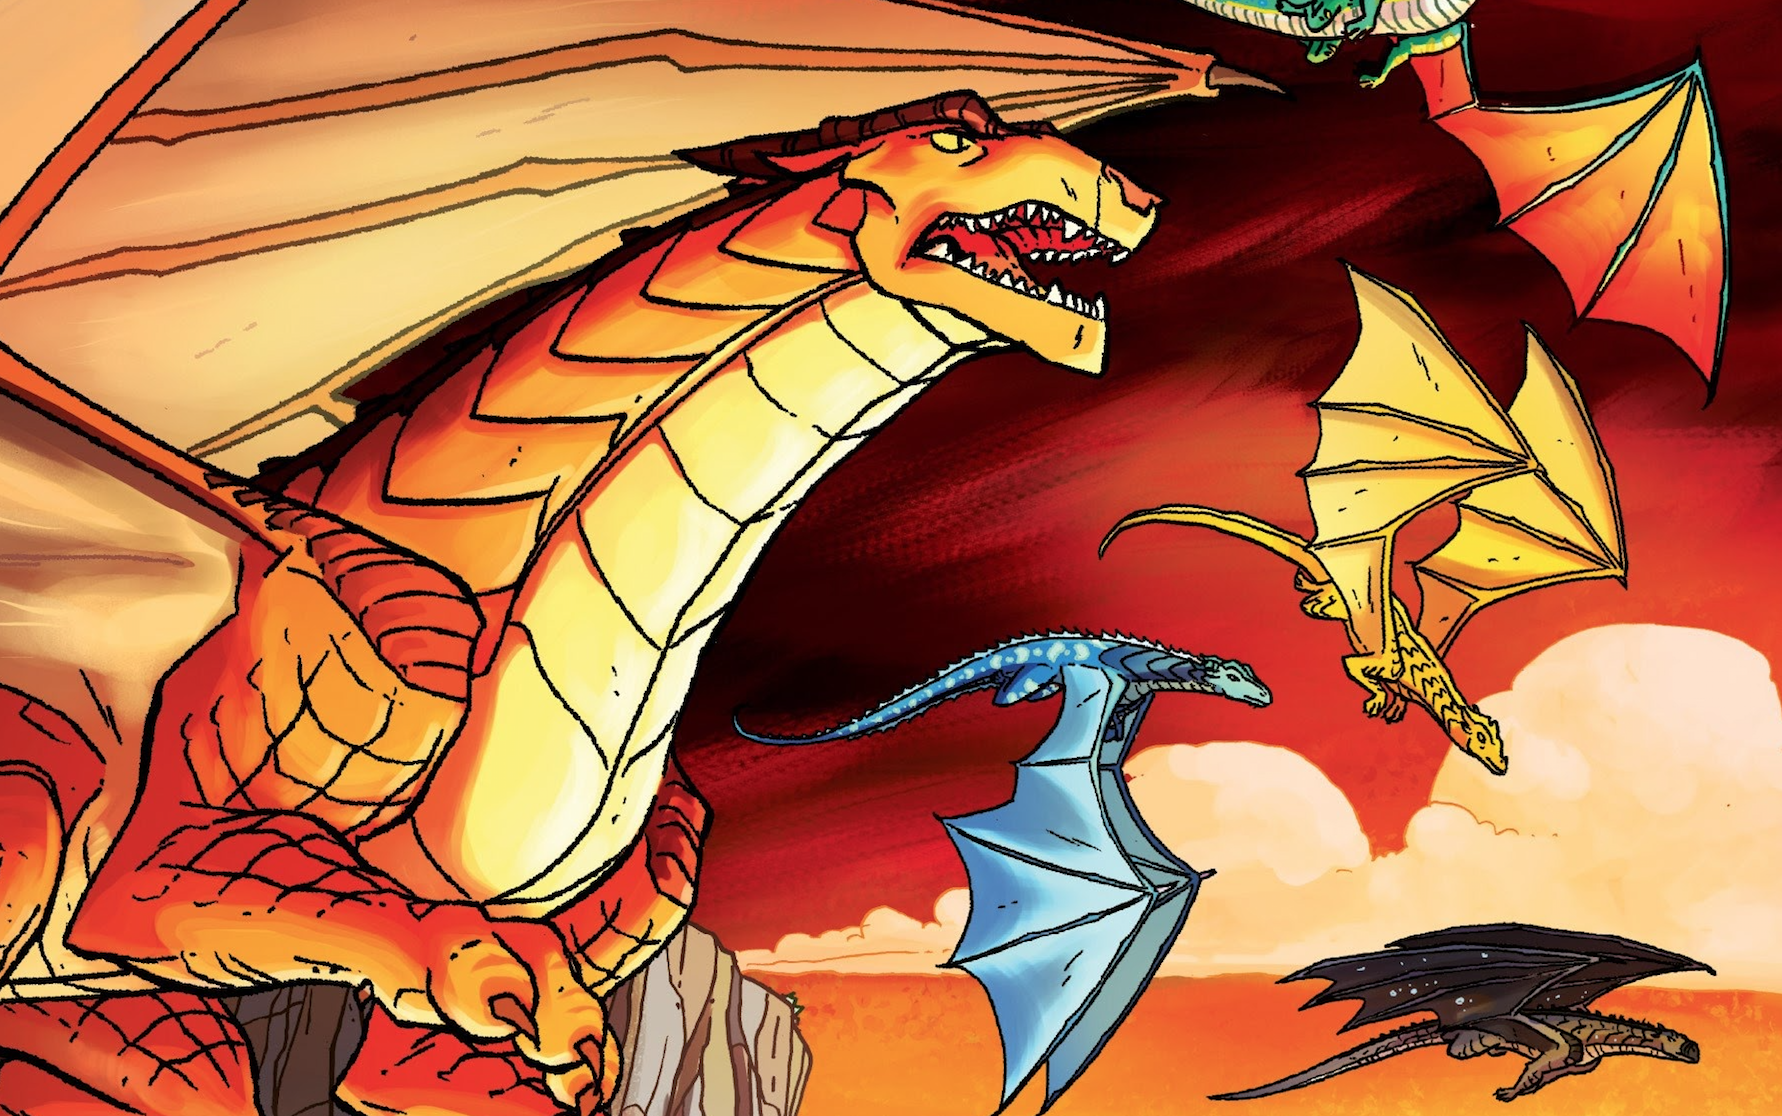 wings of fire graphic novel